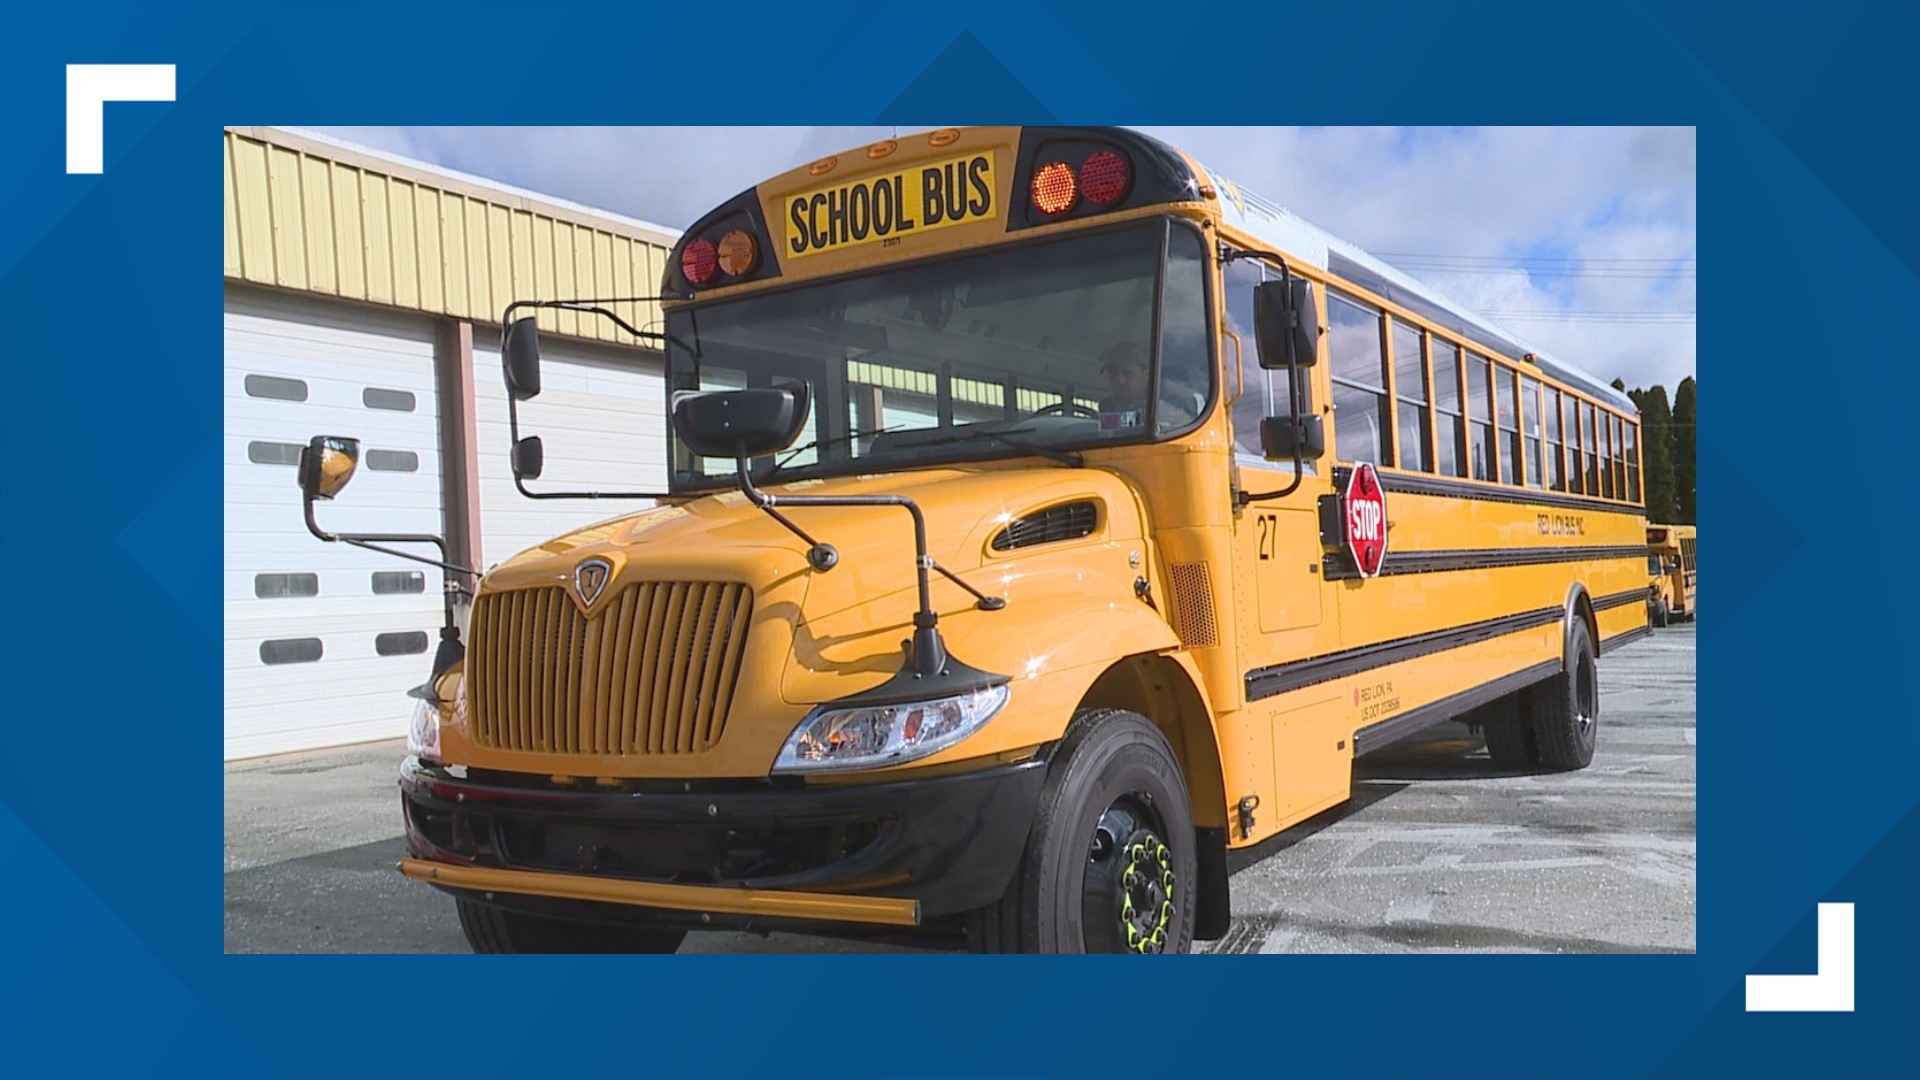 Contractors with the Pennsylvania School Bus Association say they are still struggling to hire new bus drivers across the Commonwealth.